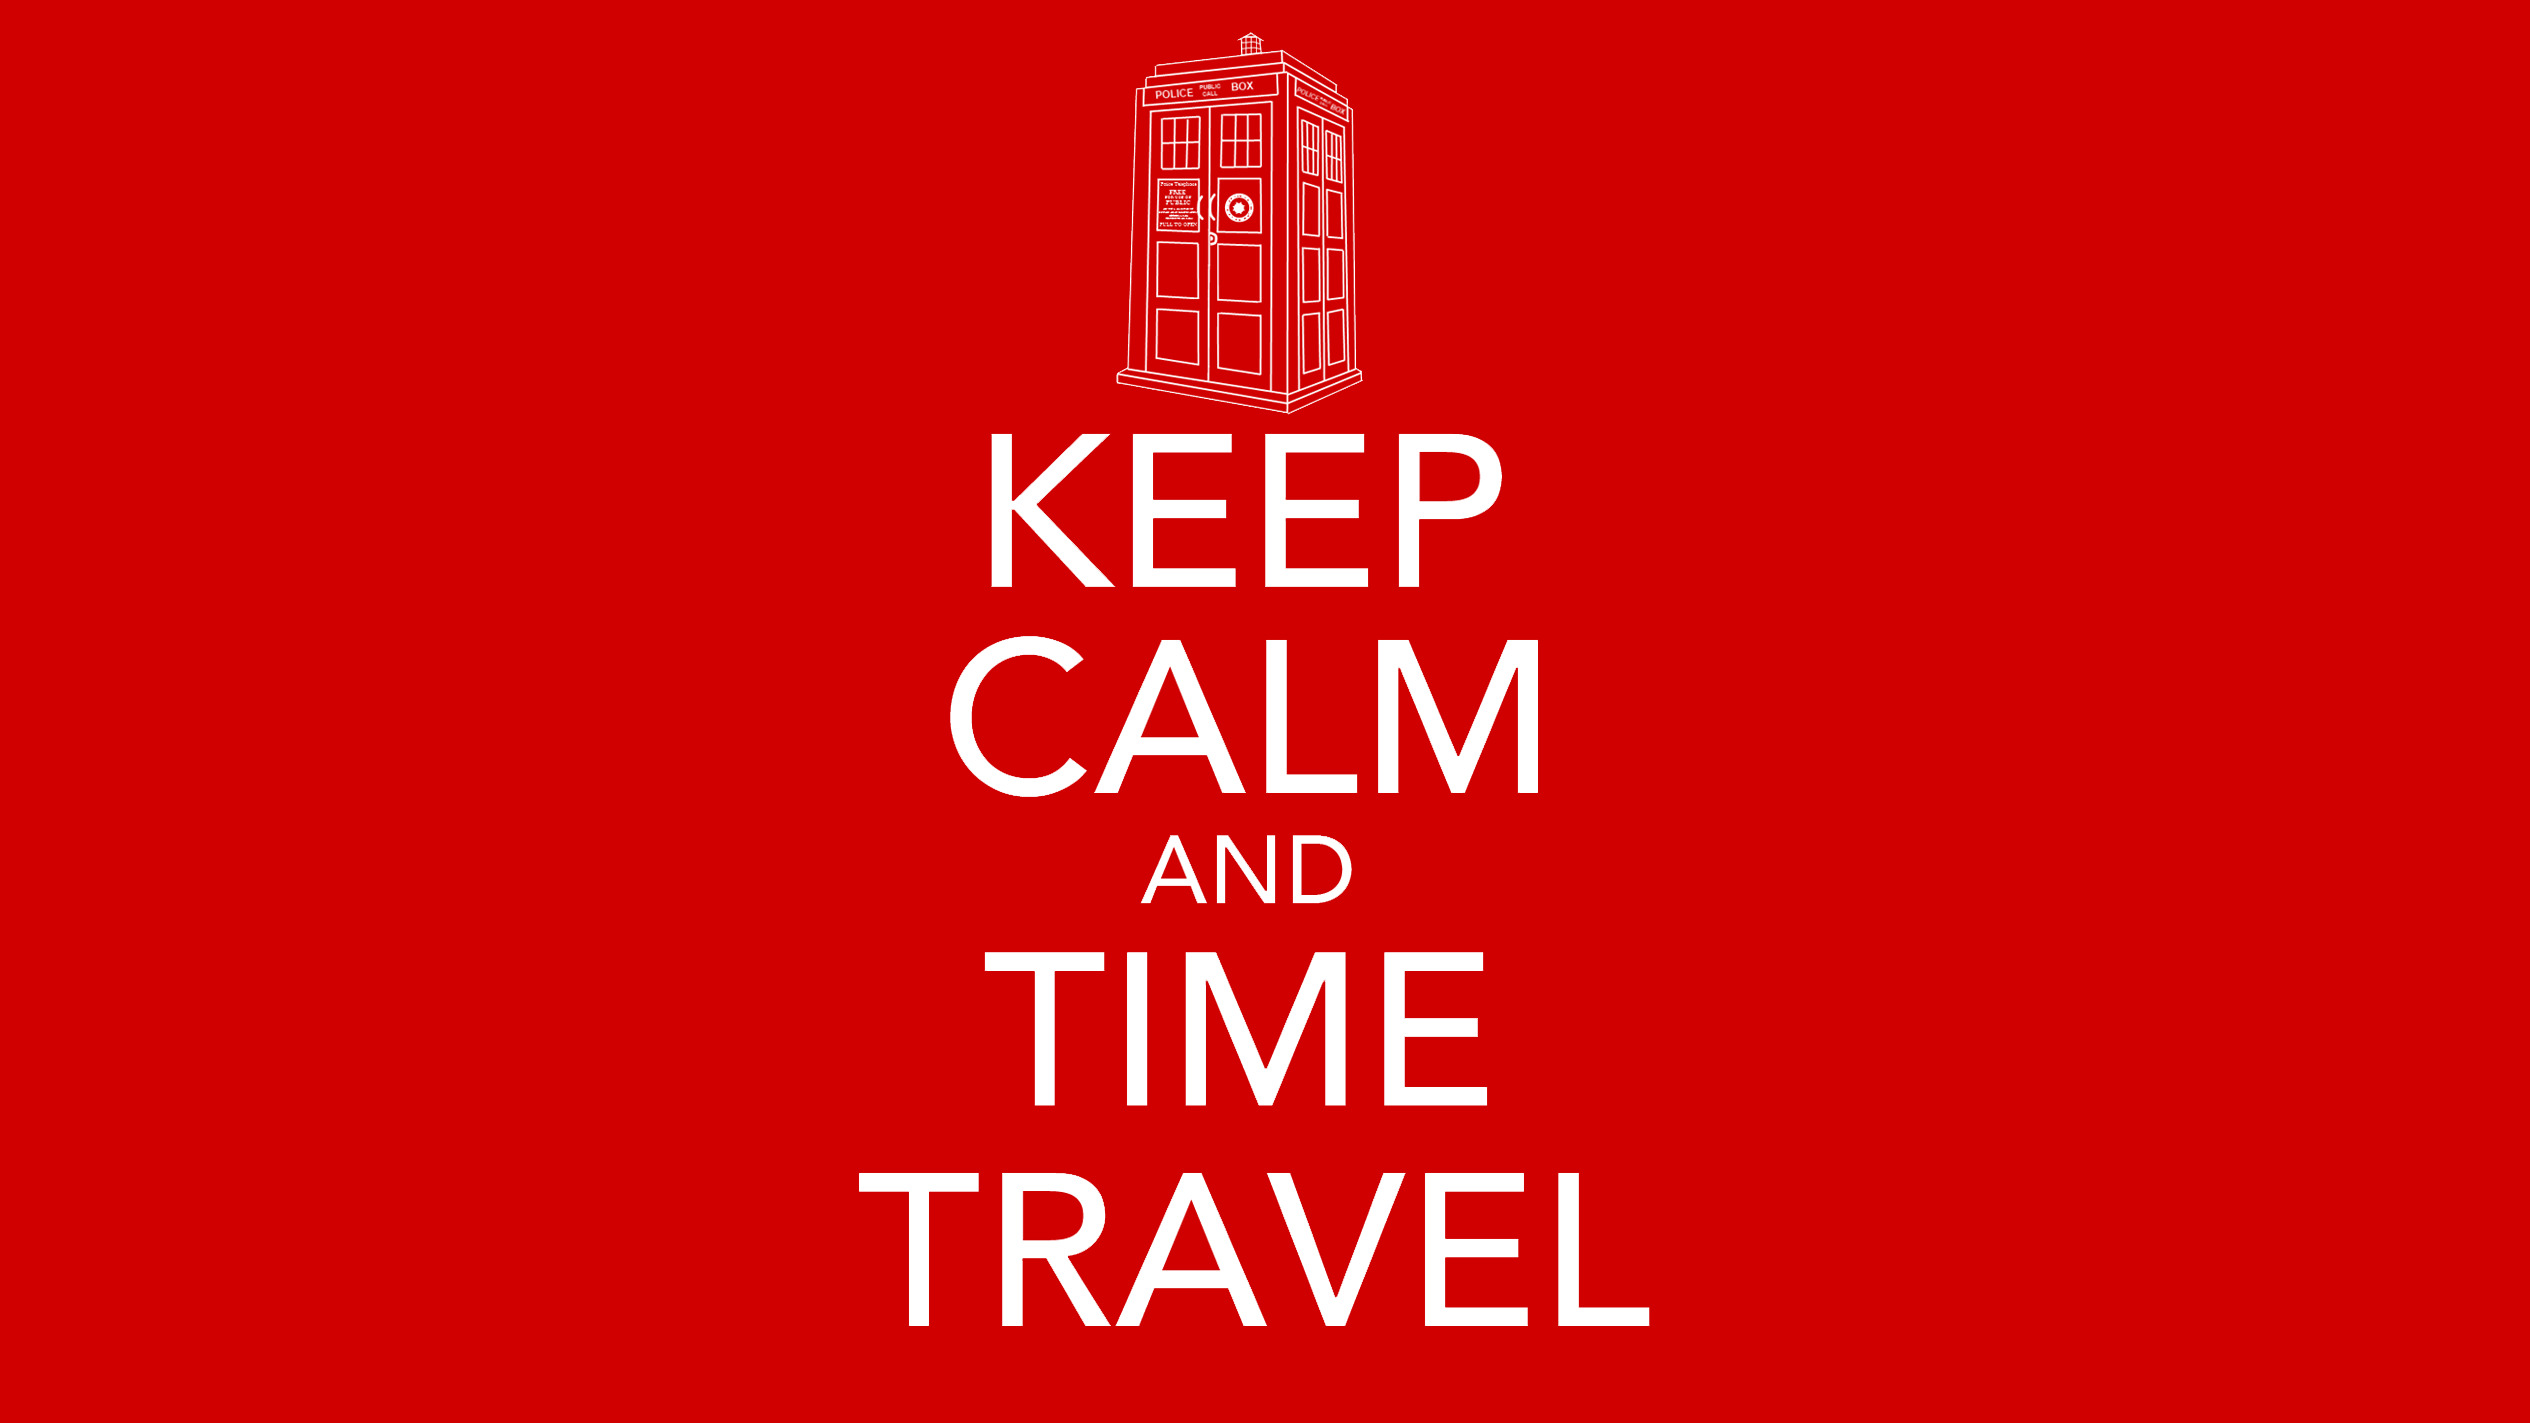 Doctor Who, Red, The Doctor, TARDIS, Artwork, Time Travel, Keep Calm And... Wallpaper